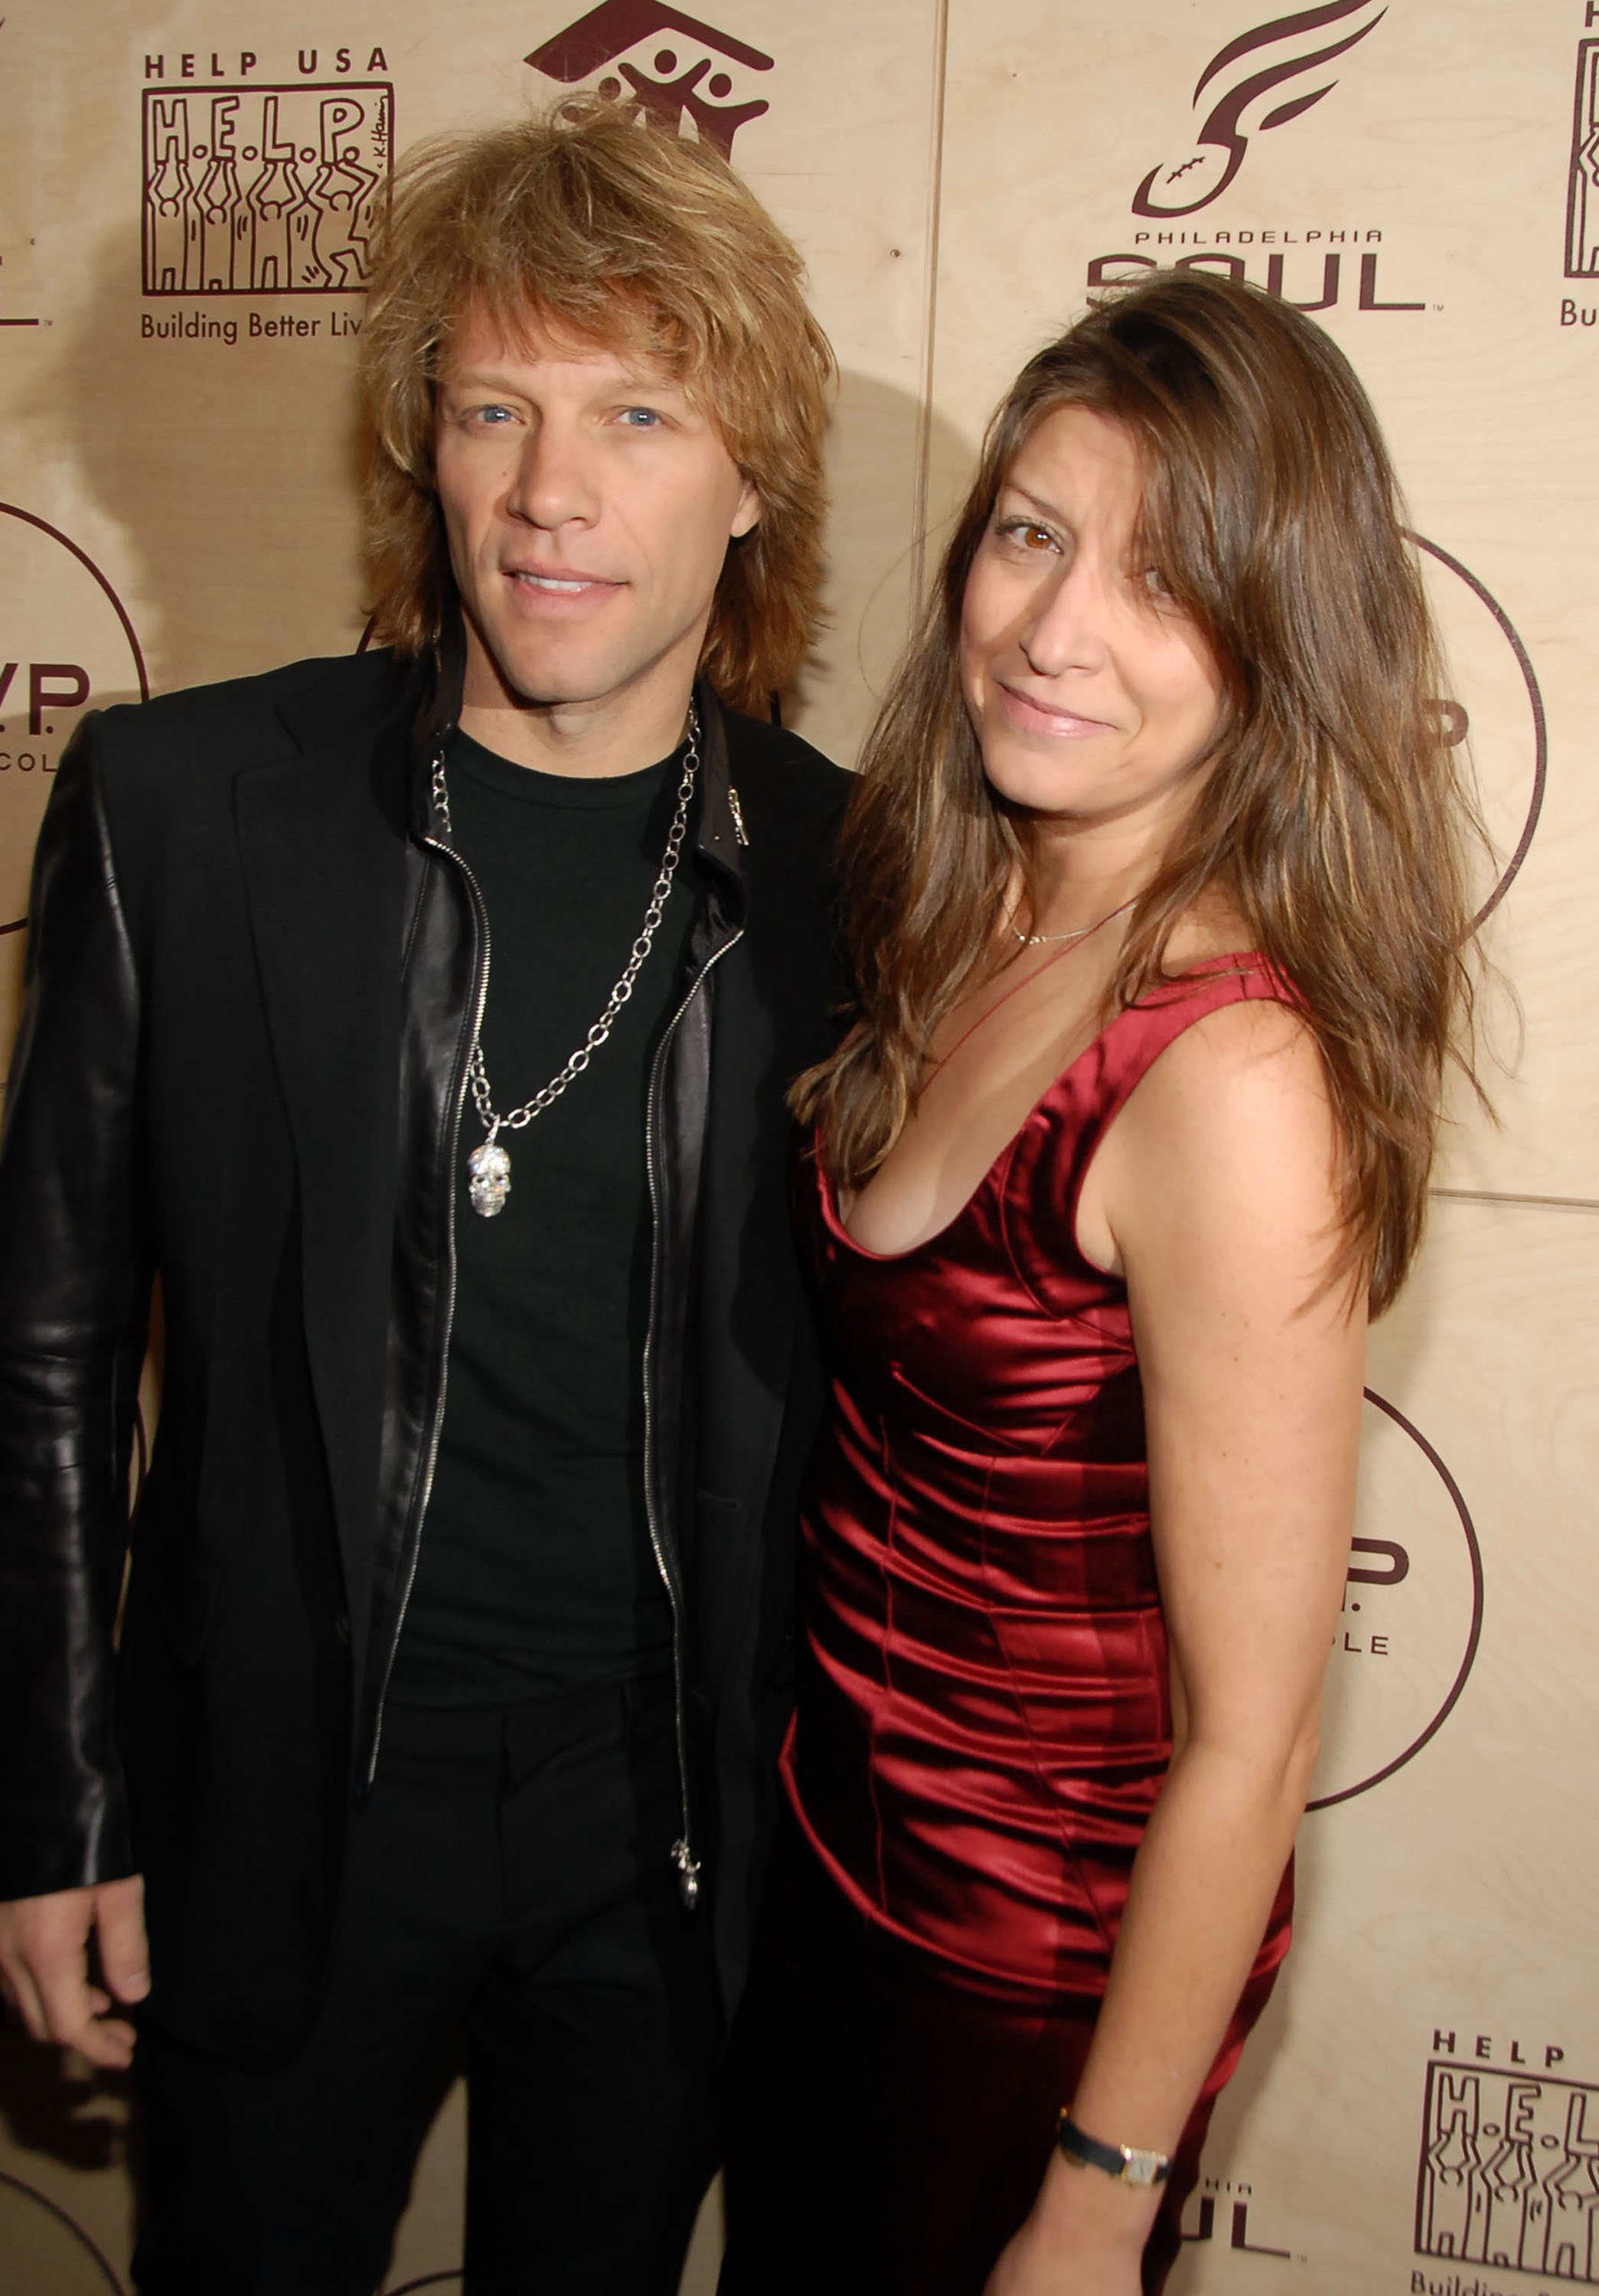 Jon Bon Jovi and Dorothea Hurley at Kenneth Cole's R.S.V.P to HELP event in New York City, on January 25, 2007. | Source: Getty Images